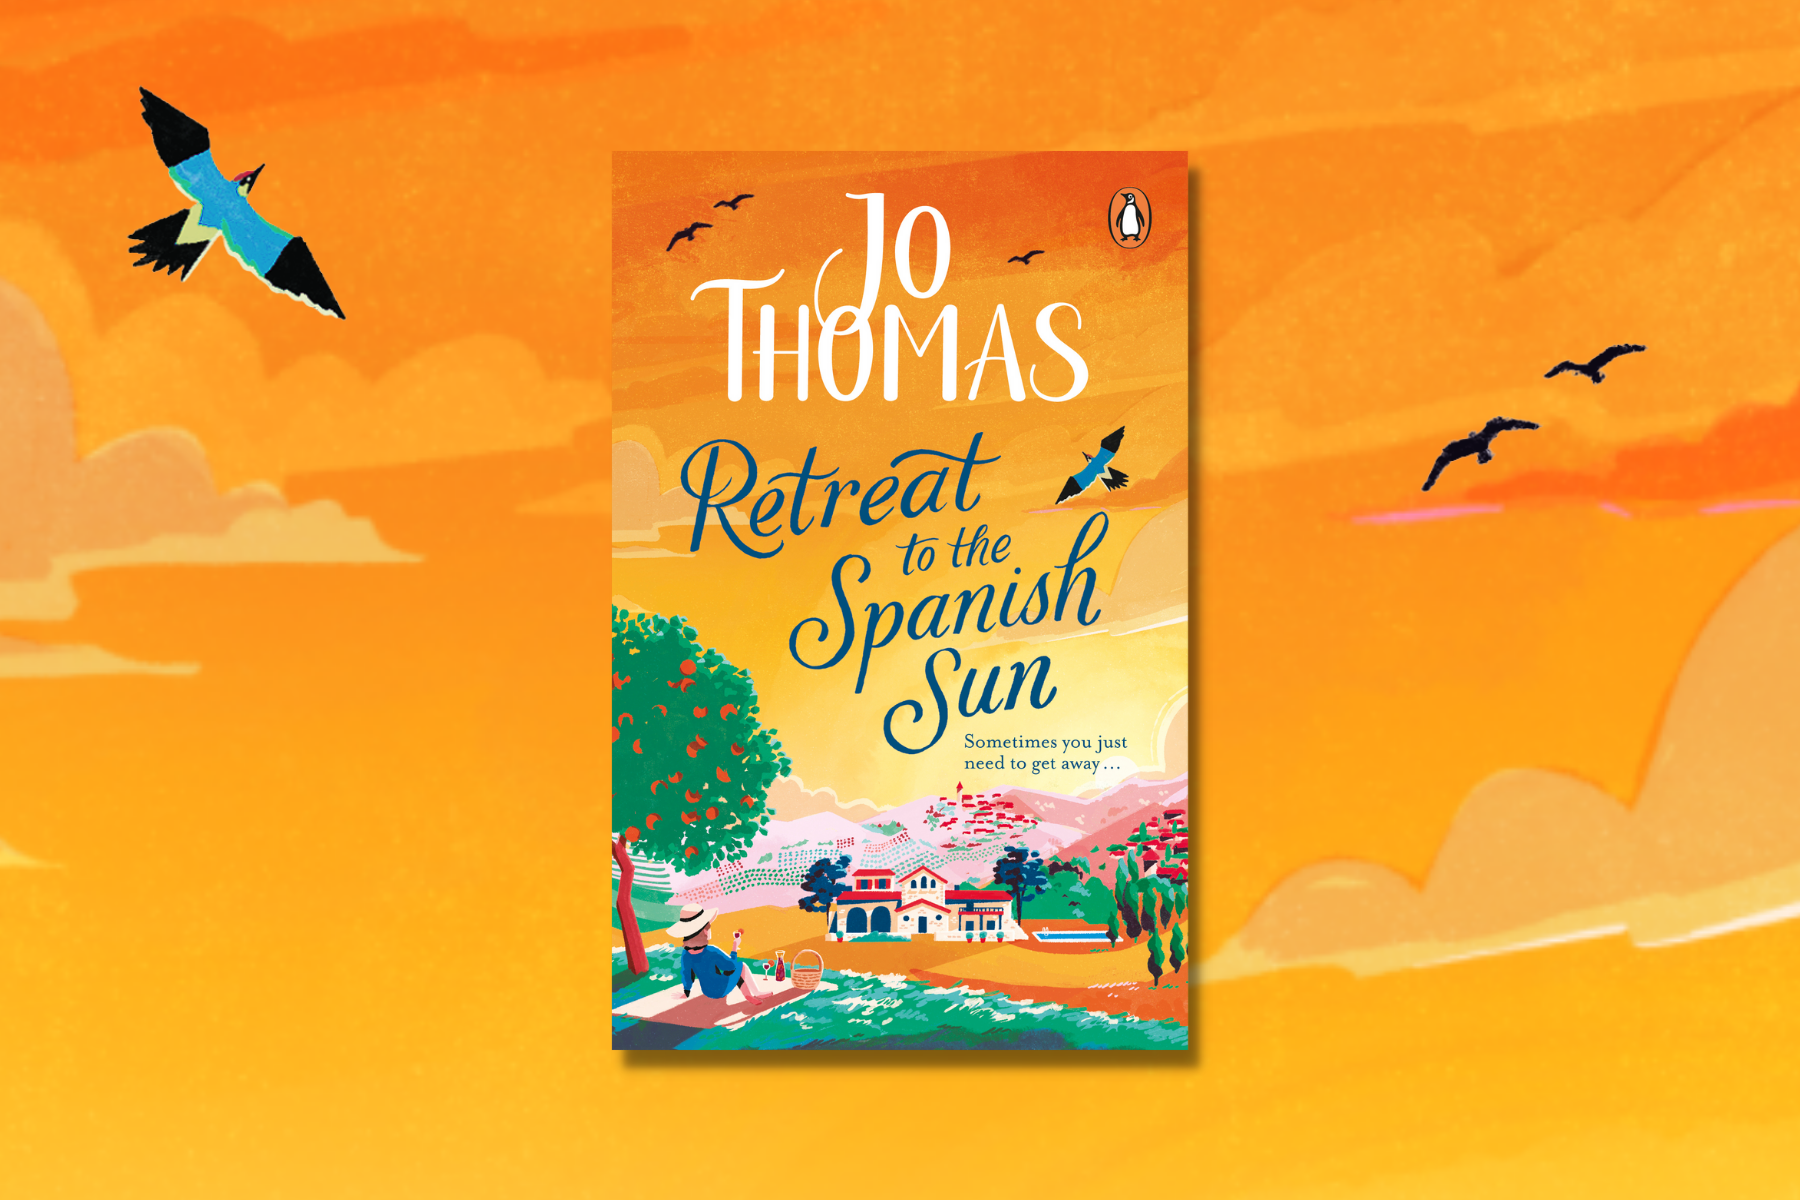 Retreat to the Spanish Sun by Jo Thomas against an orange sky background.